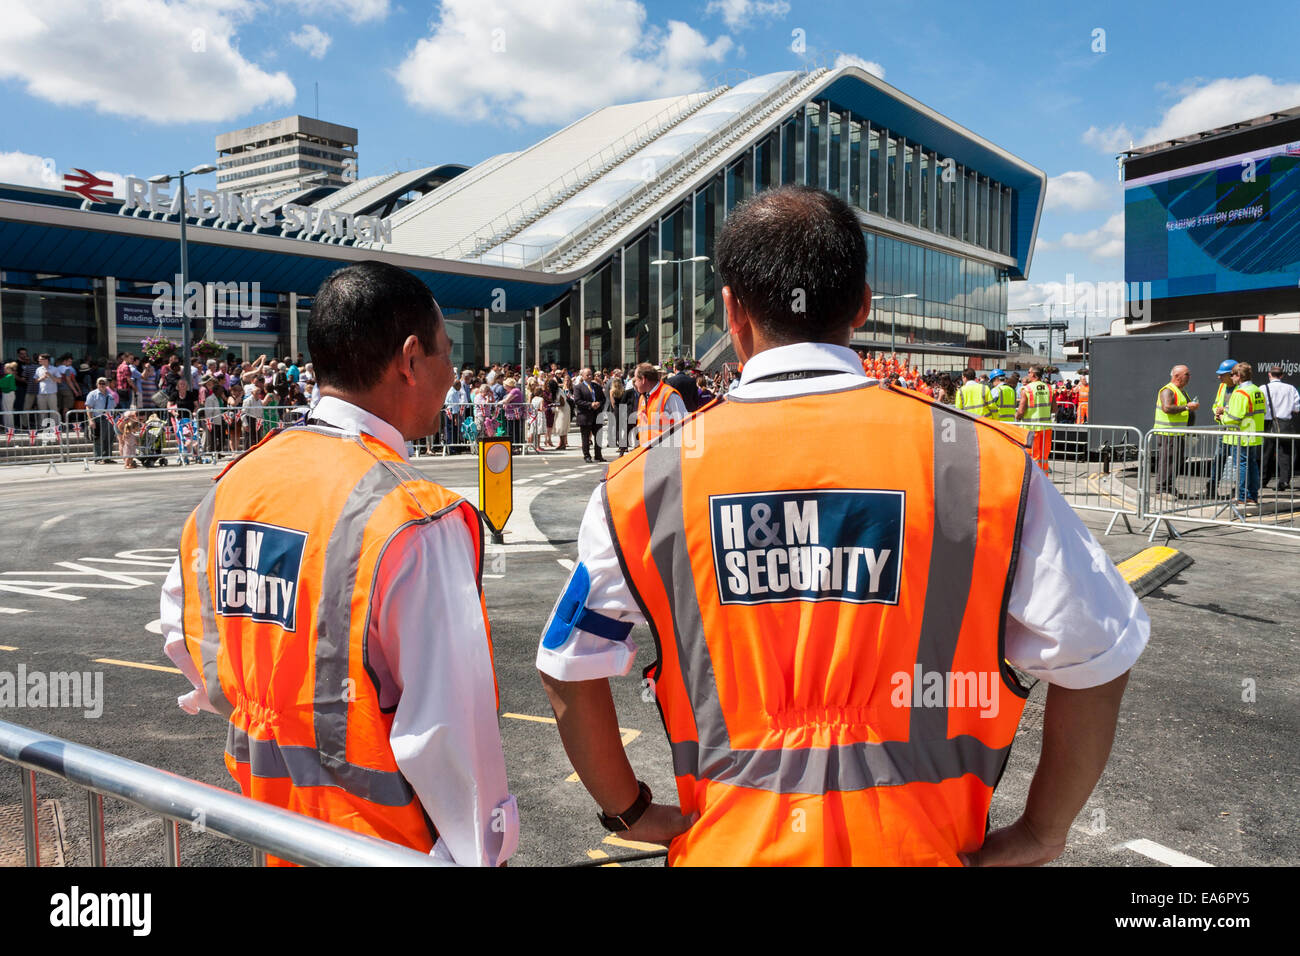 Security Guards High Resolution Stock Photography and Images - Alamy